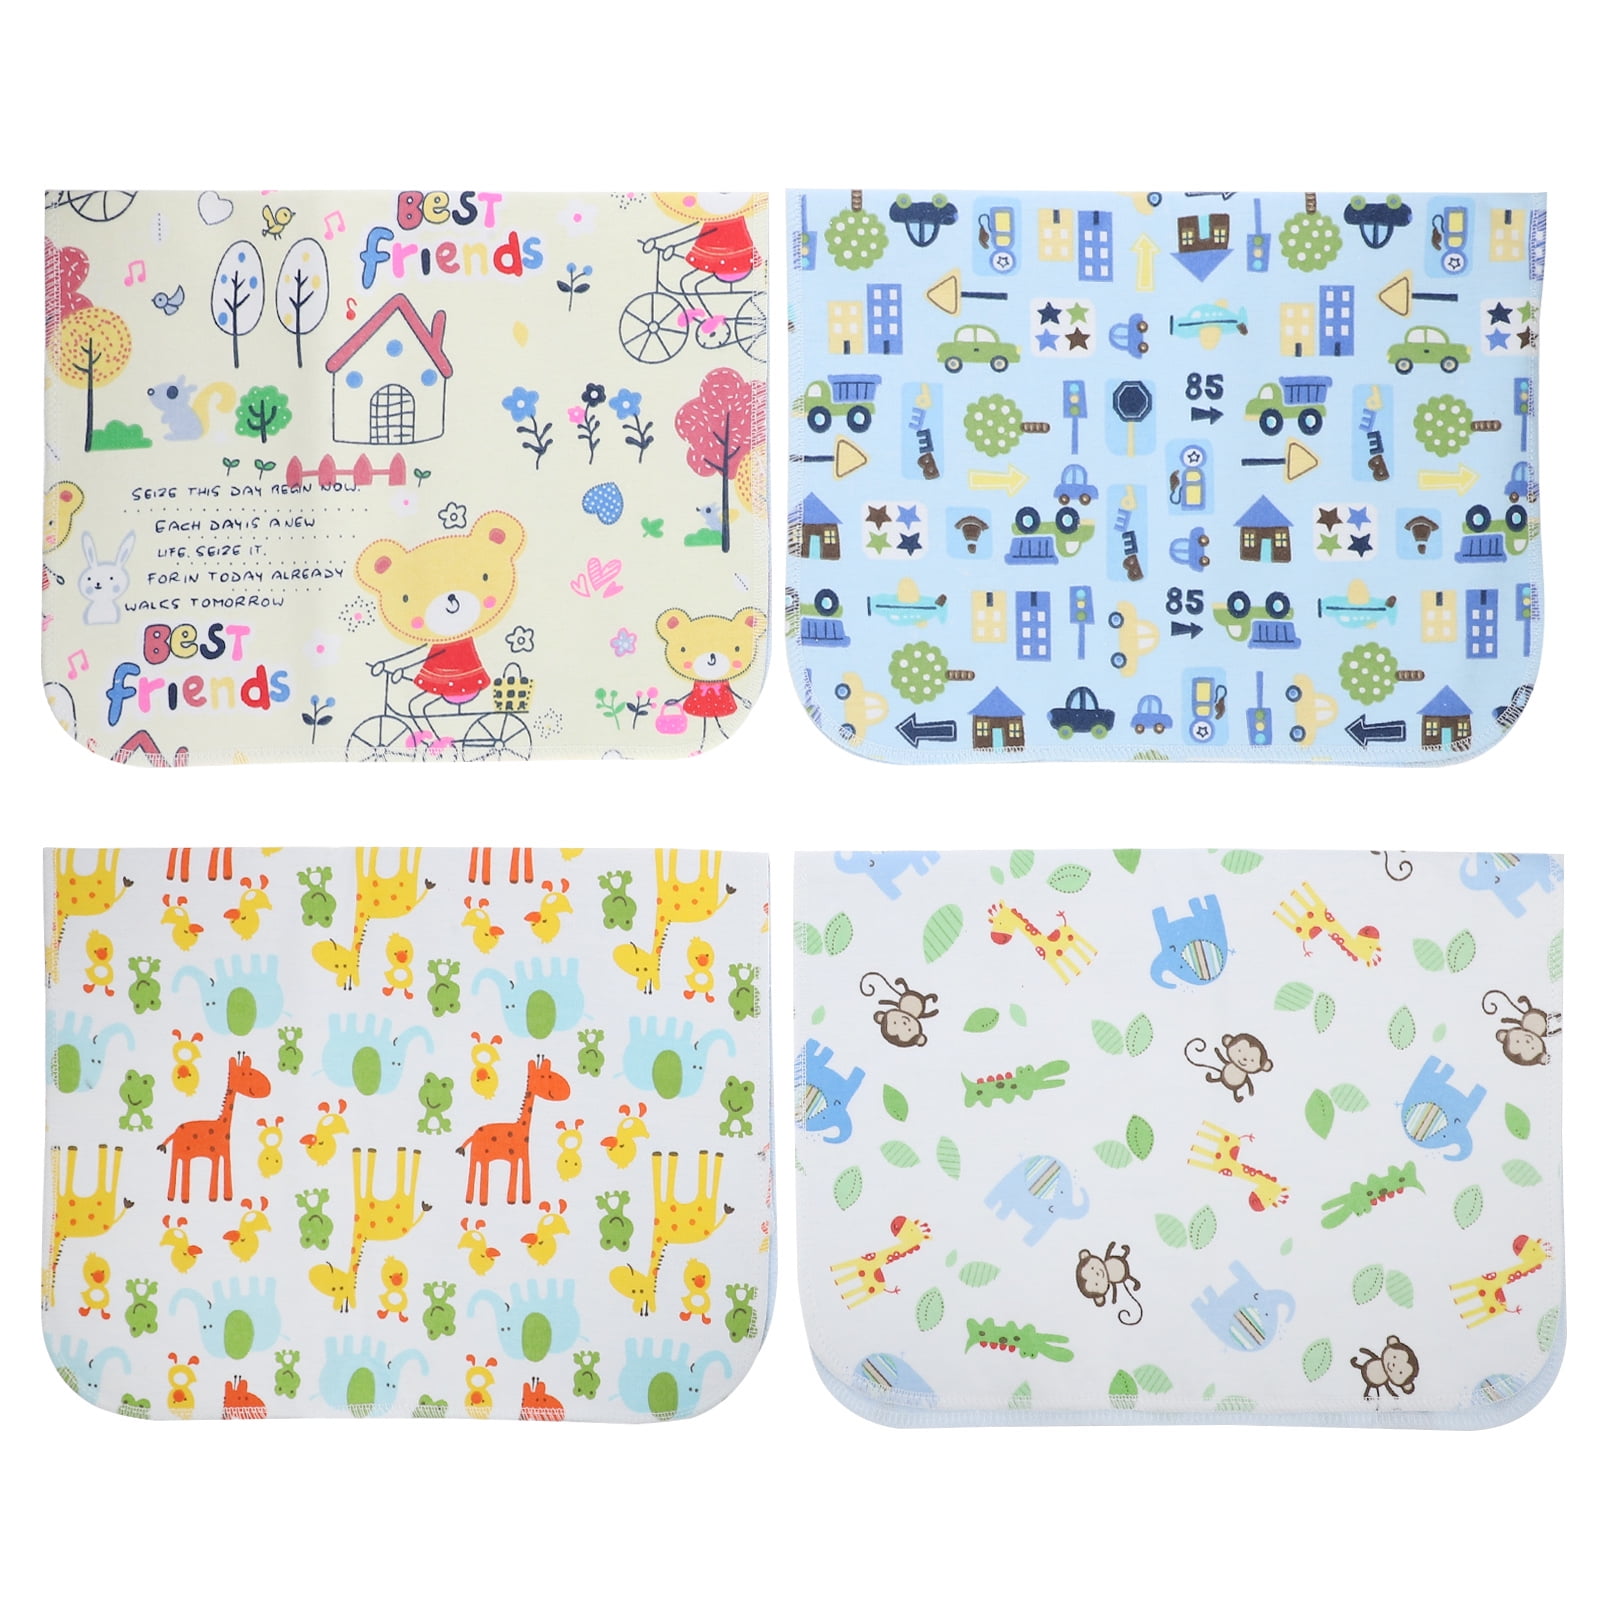 3layer Kids Baby Waterproof Sheet Urine Changing Pads Cute Cartoon Resuable  Cotton Pee Pads Baby Urine Mat for Bed 4size